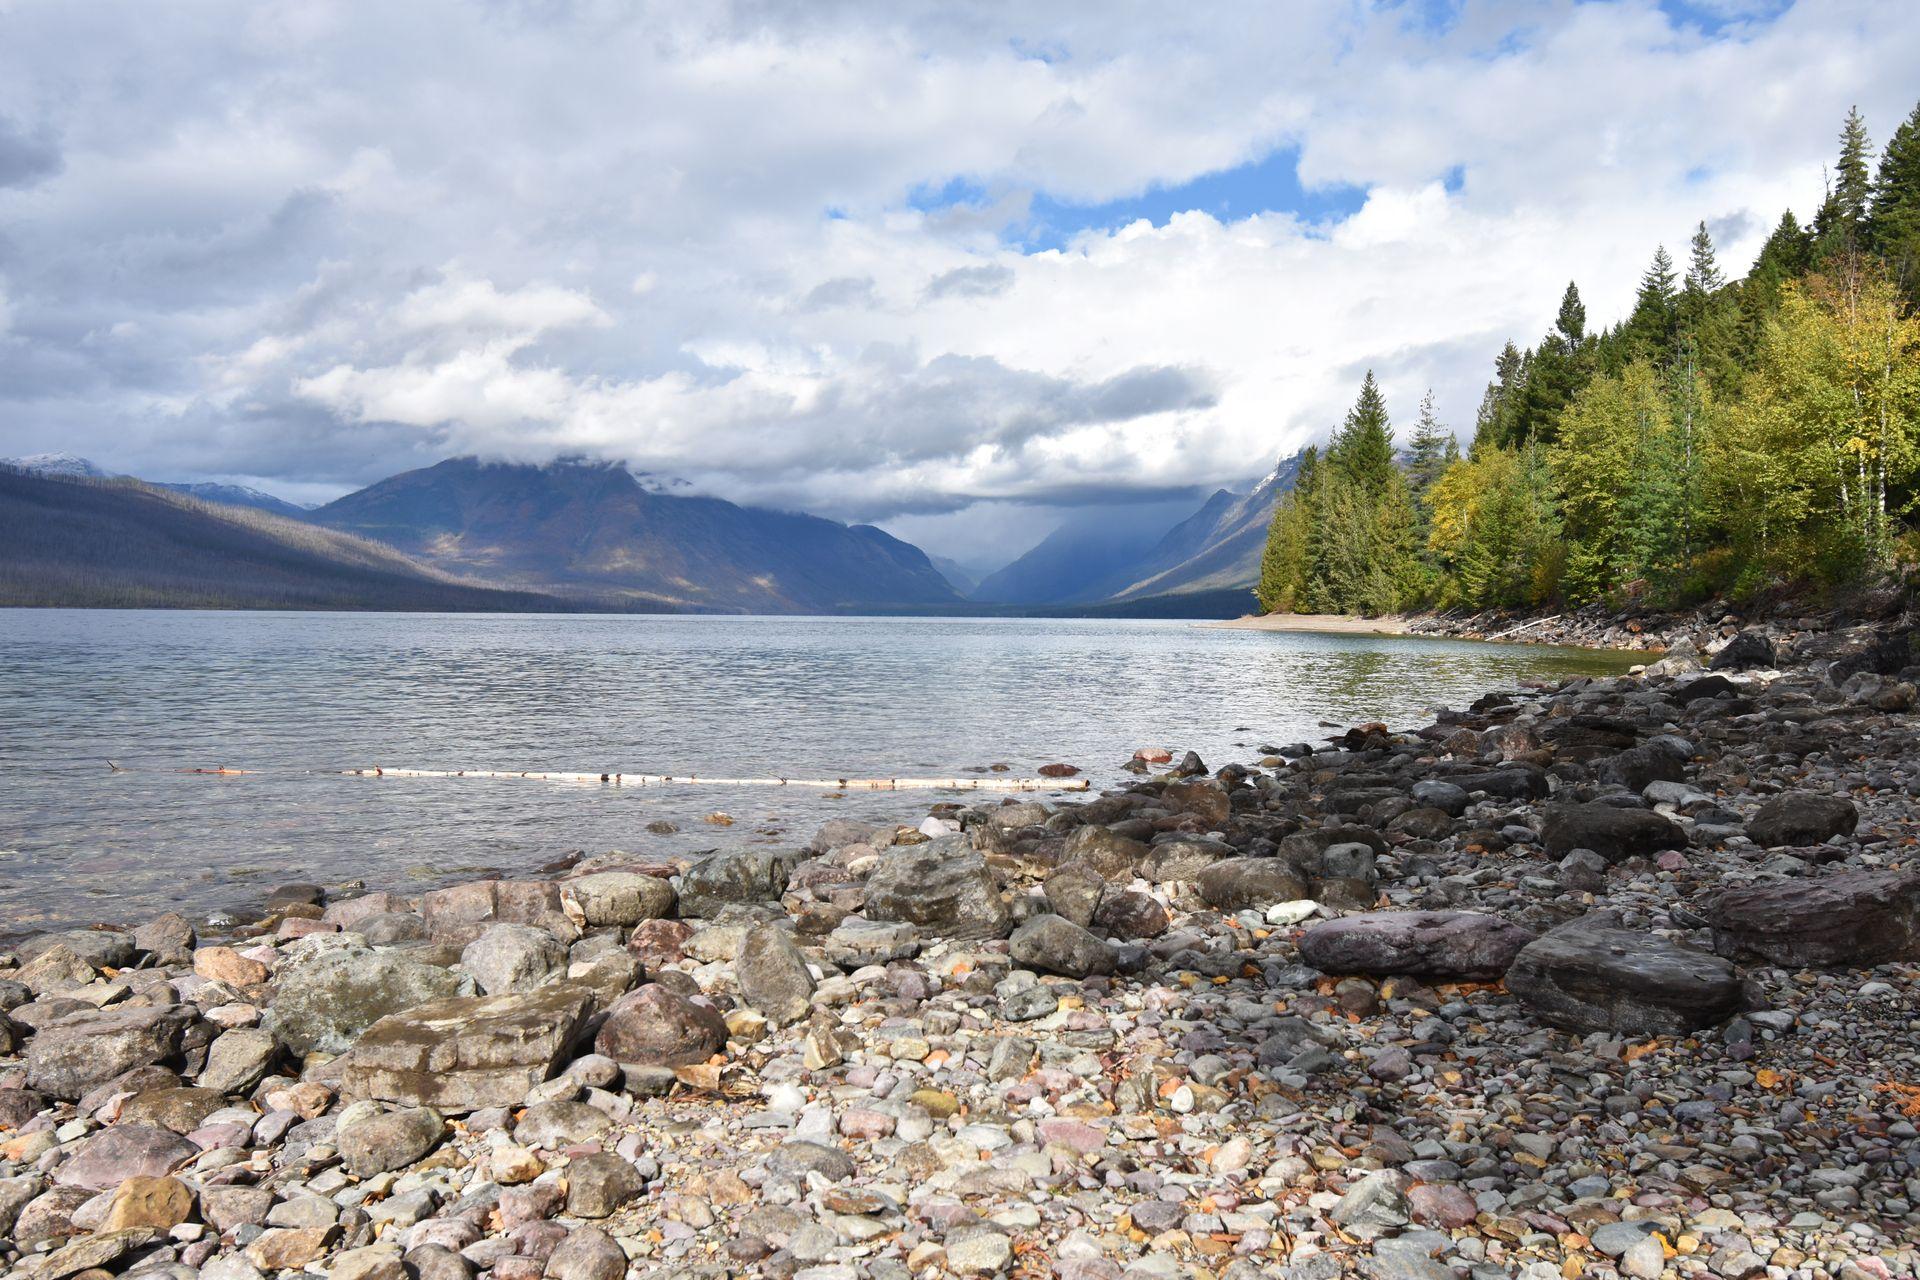 A rocky shore next to Lake McDonald. A log floats in the lake and there are mountains and trees across the lake.